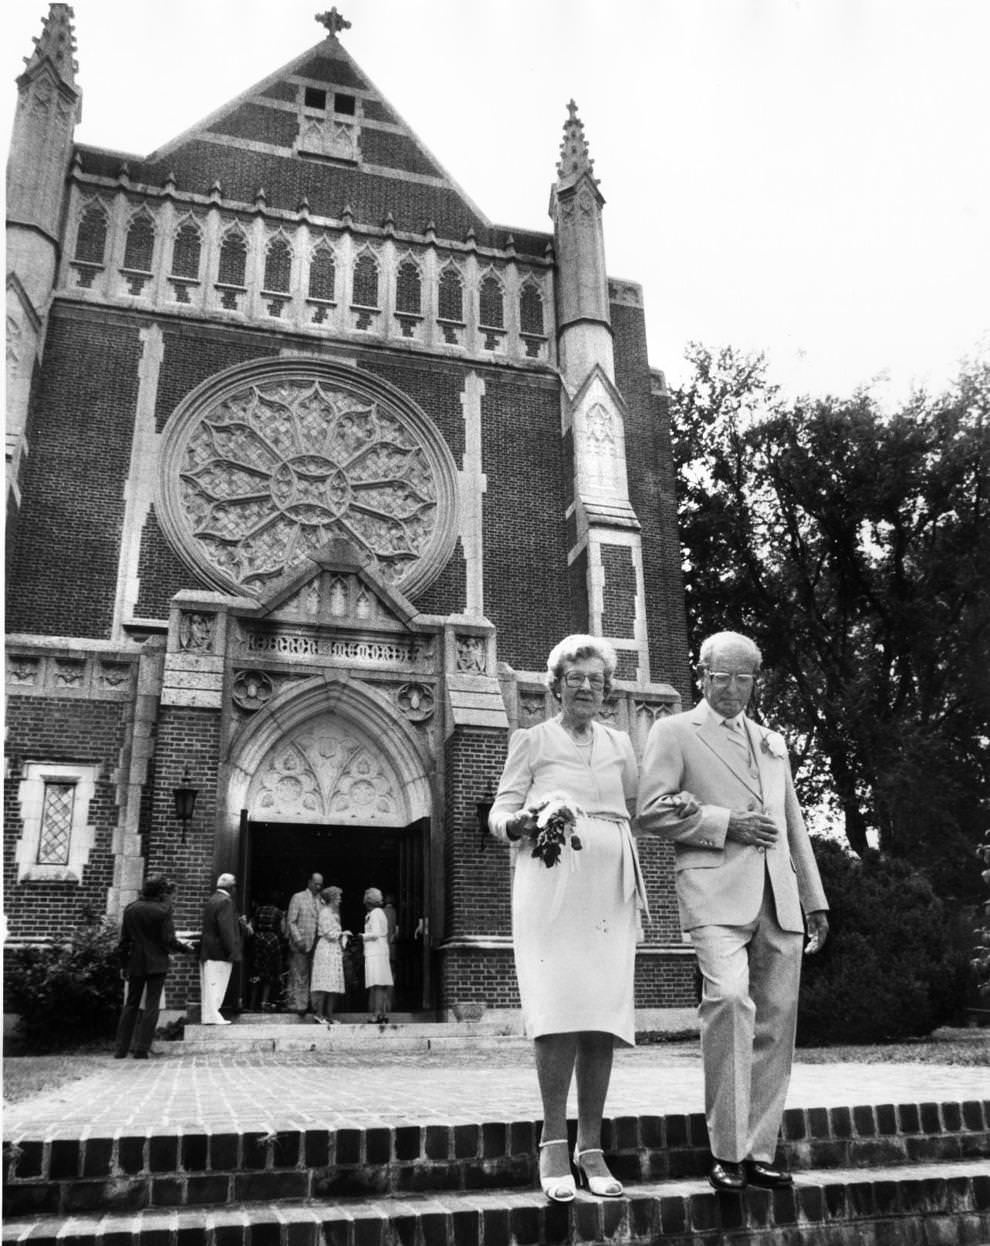 Mr. and Mrs. Elmer Armstrong left the Cannon Memorial Chapel at the University of Richmond after marking a special day, 1981